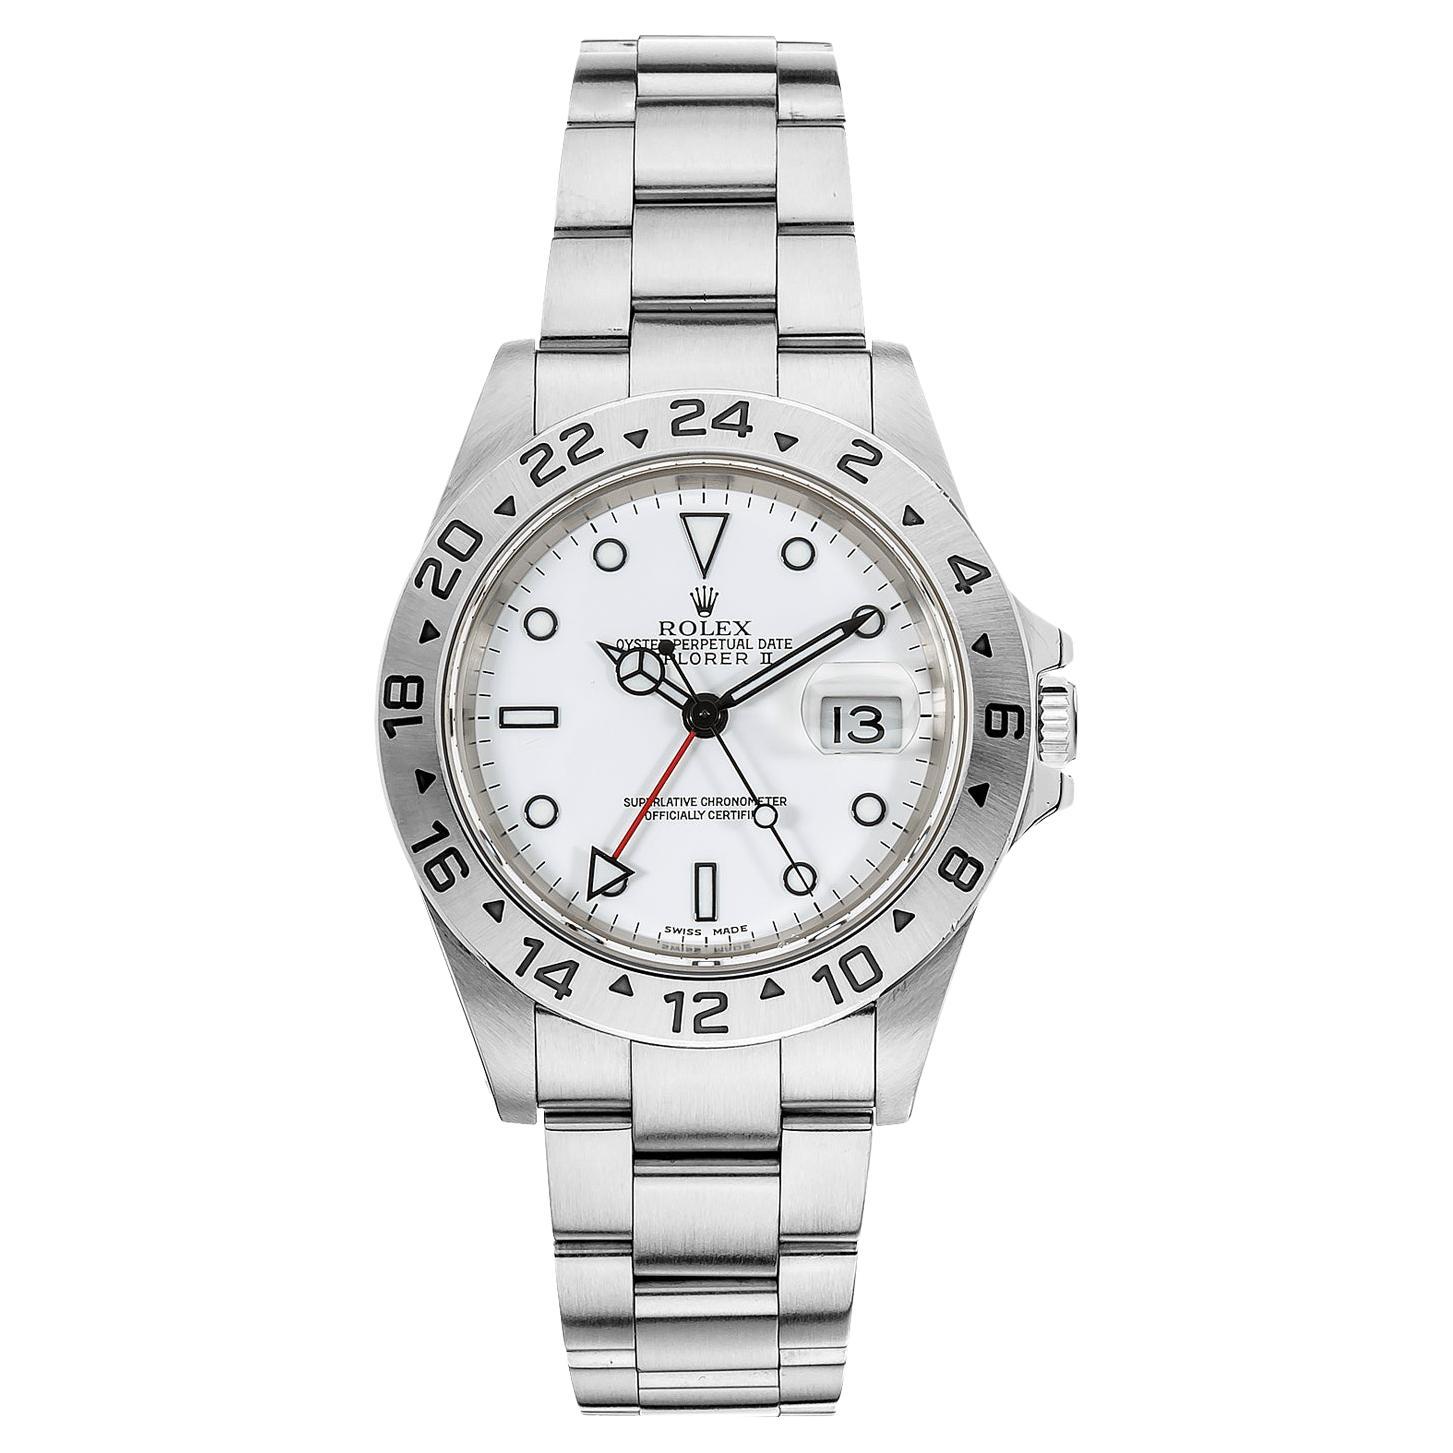 Rolex Explorer II White Polar Dial Stainless Steel Oyster Mens Watch 16570 For Sale